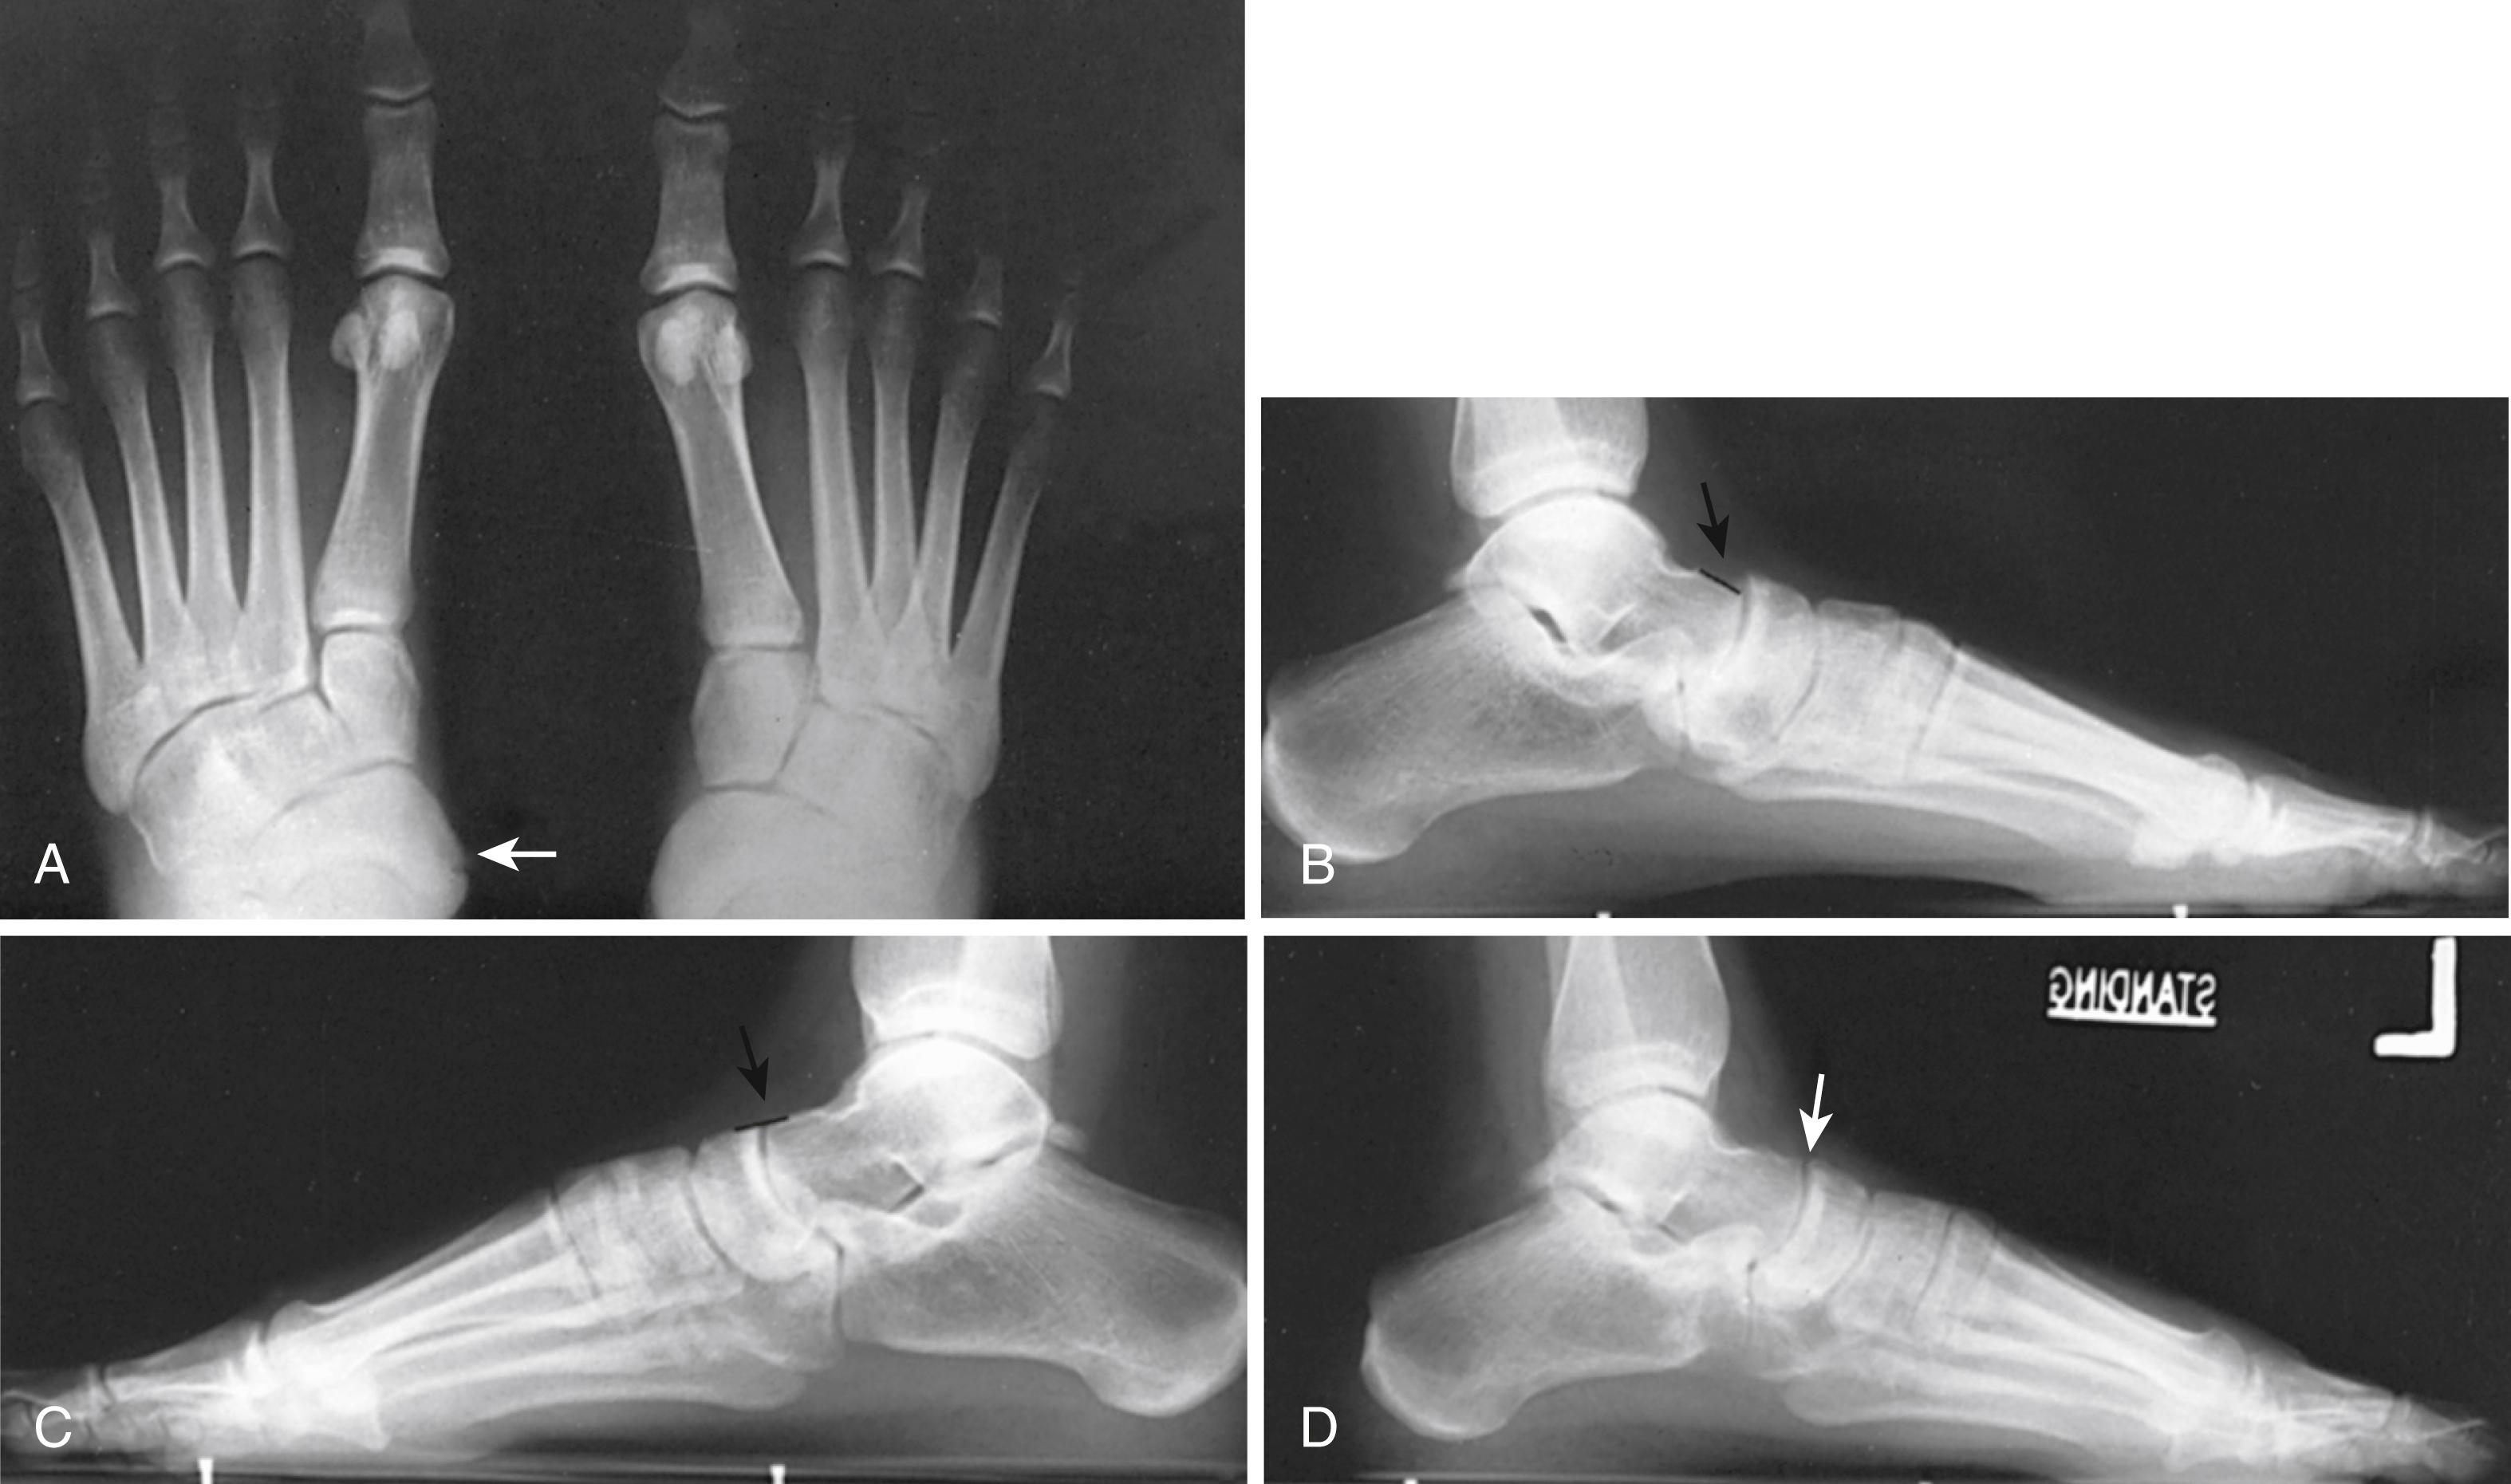 FIGURE 83.39, A, Bilateral cornuate navicular and, on left, accessory navicular (white arrow) in 19-year-old woman. Note on left pronation of forefoot (evidenced by opening up of metatarsal-tarsal joint spaces), apparent widening of intermetatarsal spaces, and uncovering of fibular sesamoid compared with right foot. On standing lateral views of left foot, which had unilateral pes planus, talus is plantarflexed (B) compared with asymptomatic right foot (C). D, After excision of navicular flush with medial cuneiform, advancement of posterior tibial tendon distally, and lengthening of lateral column of foot with calcaneal opening wedge osteotomy (Evans procedure). Talonavicular joint reduced congruously but not with just advancement of posterior tibial tendon.